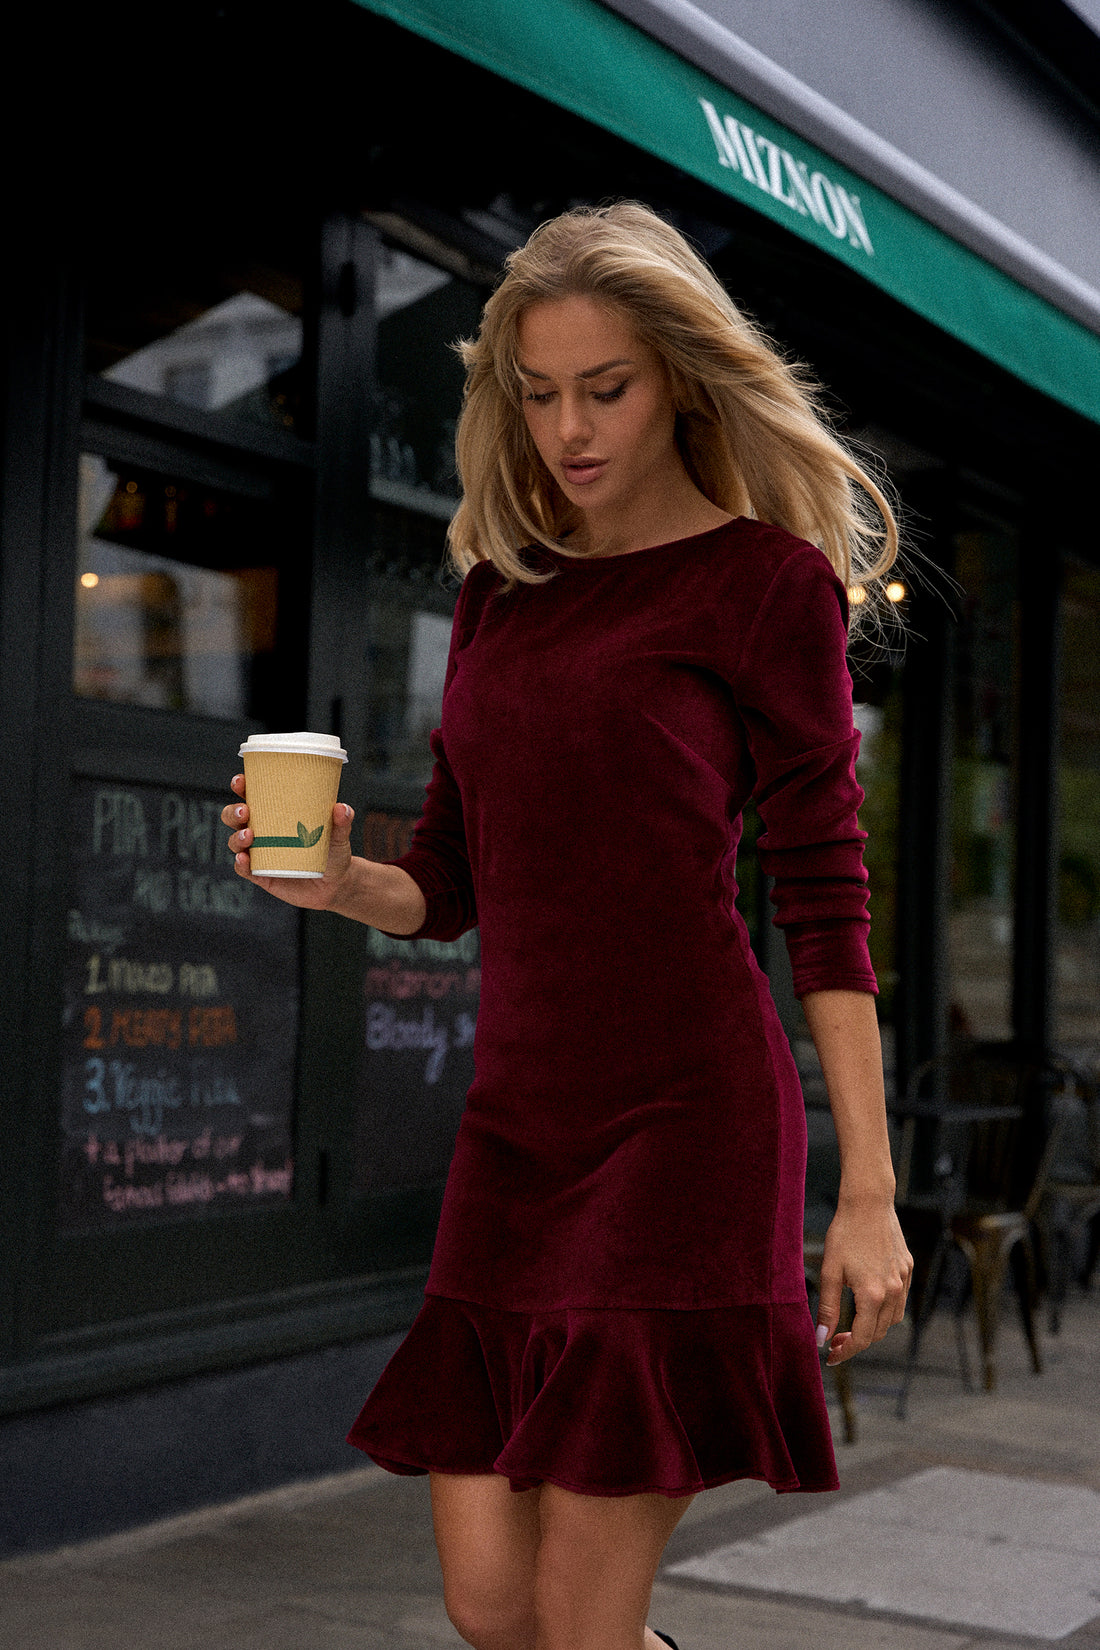 Velvet Charm Dress with Ruffle Hem | Strictly In | Our Velvet Charm dress. Crafted from plush velvet knit, this sheath dress features a flirtatious ruffled hem, ensuring you stand out at any event. Pulled over the head with long sleeves, it's an above-knee stunner for timeless glamour.